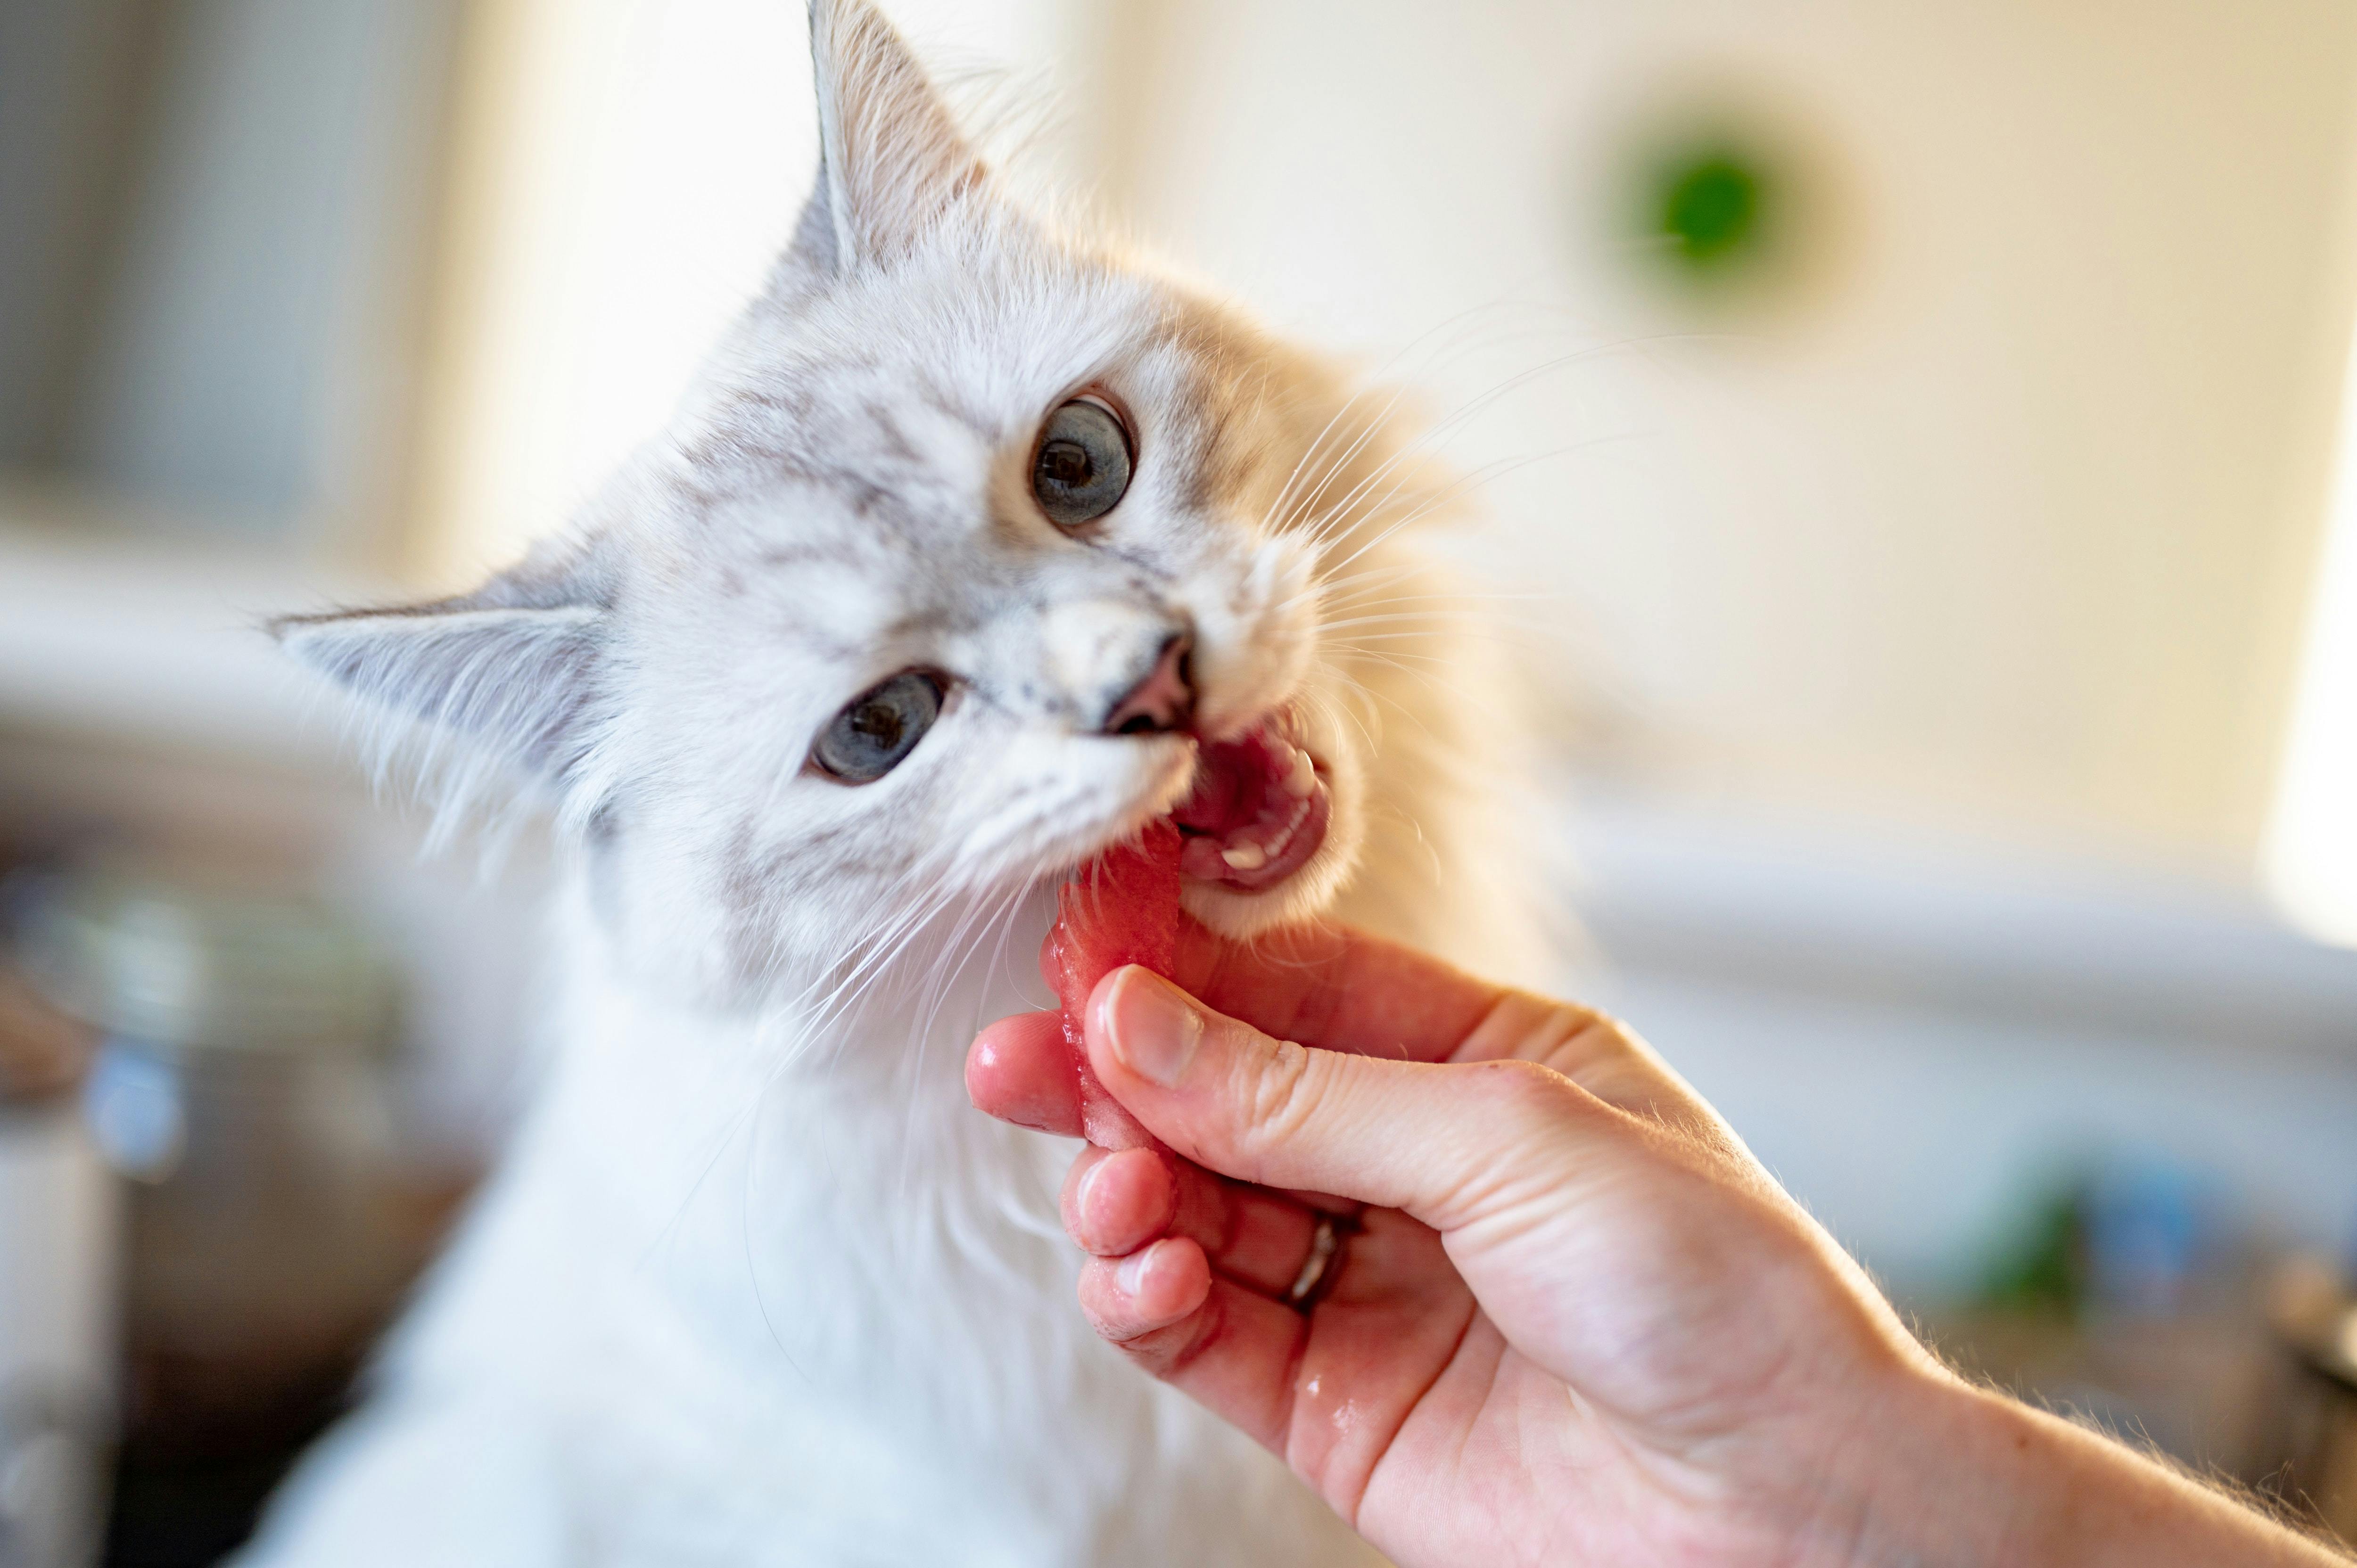 A cat being fed a bite of food